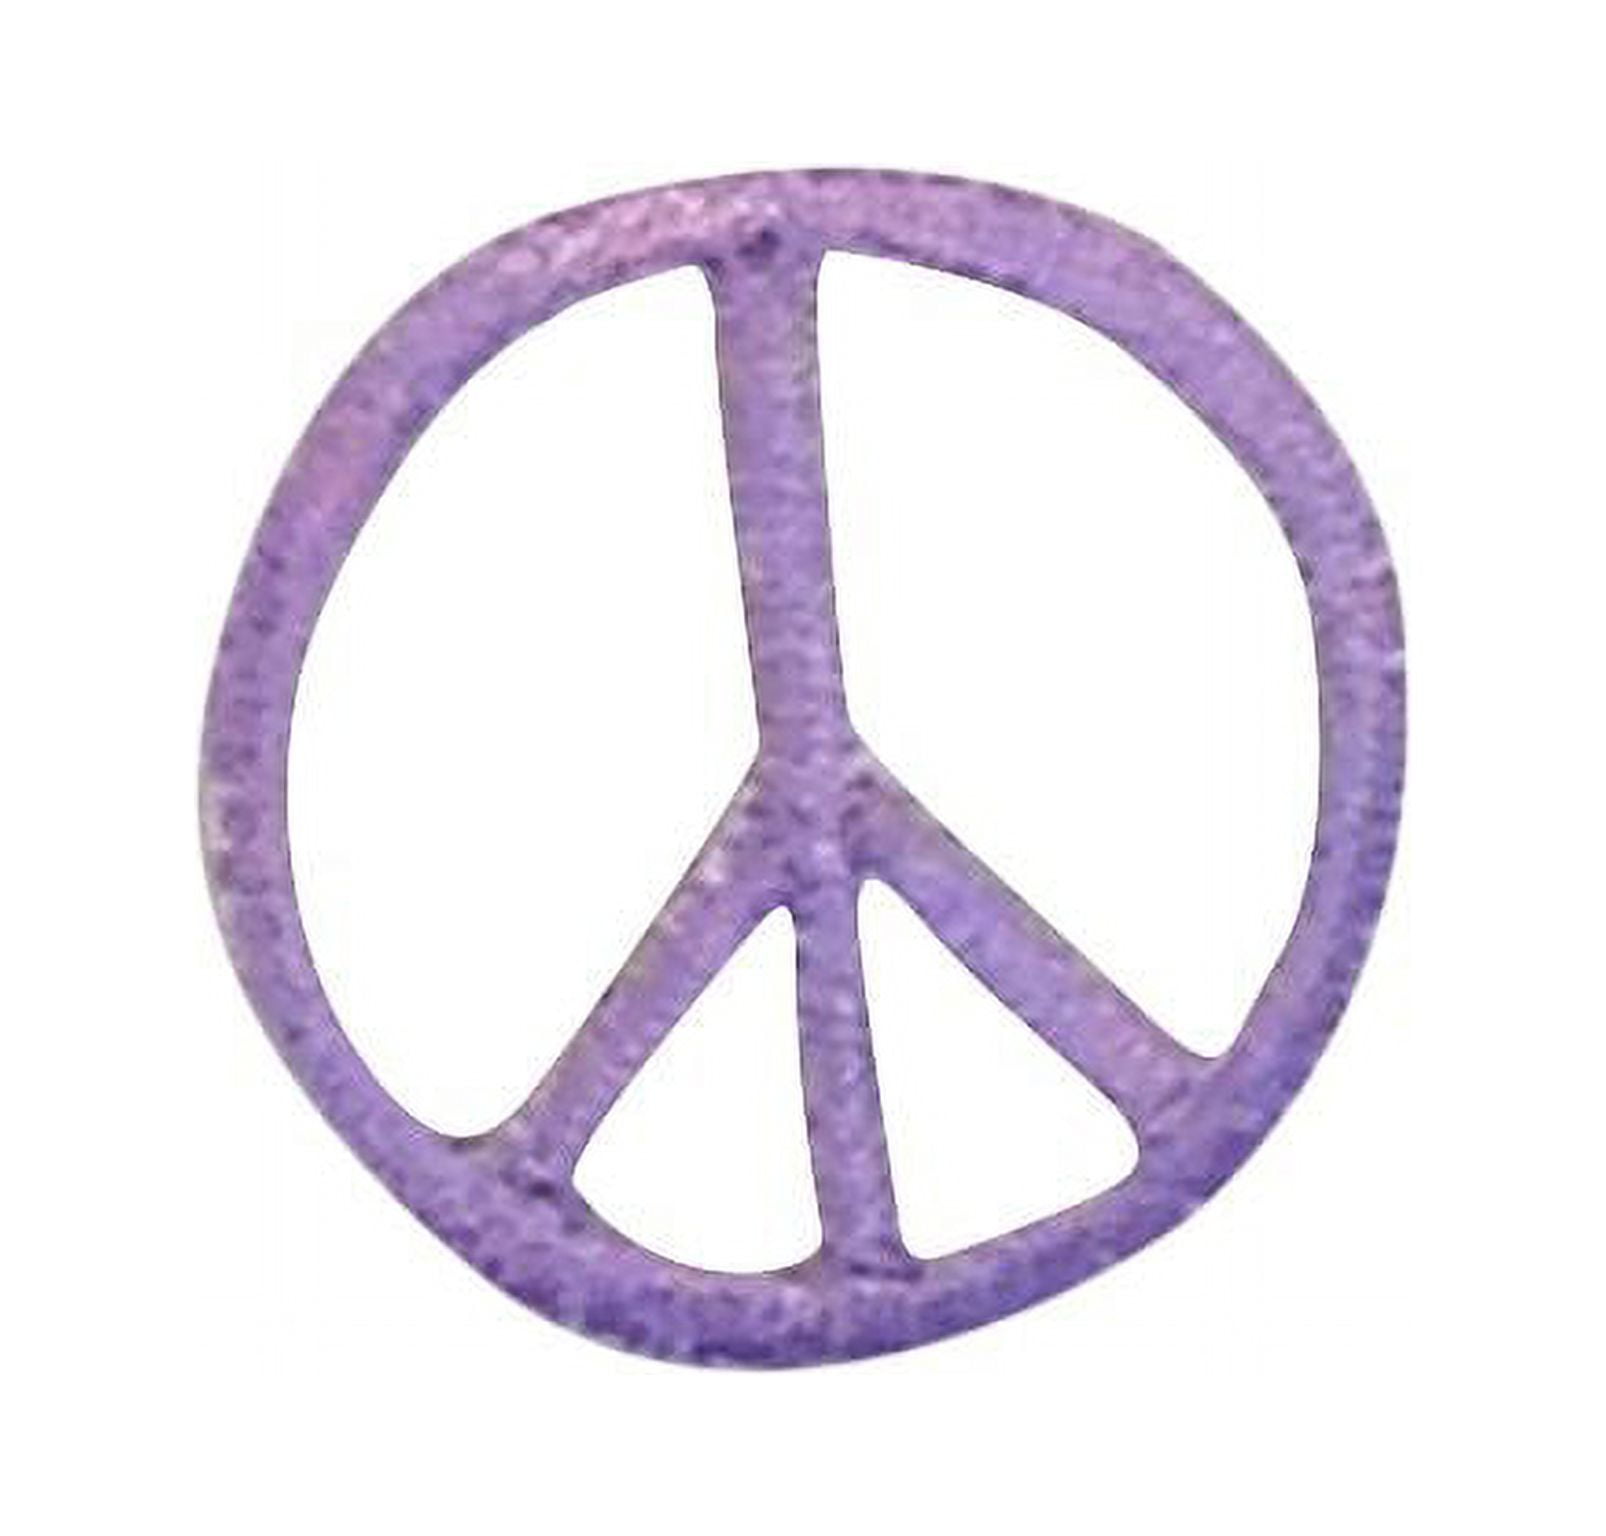 Peace sign, blue eye & red heart iron on fabric embroidered